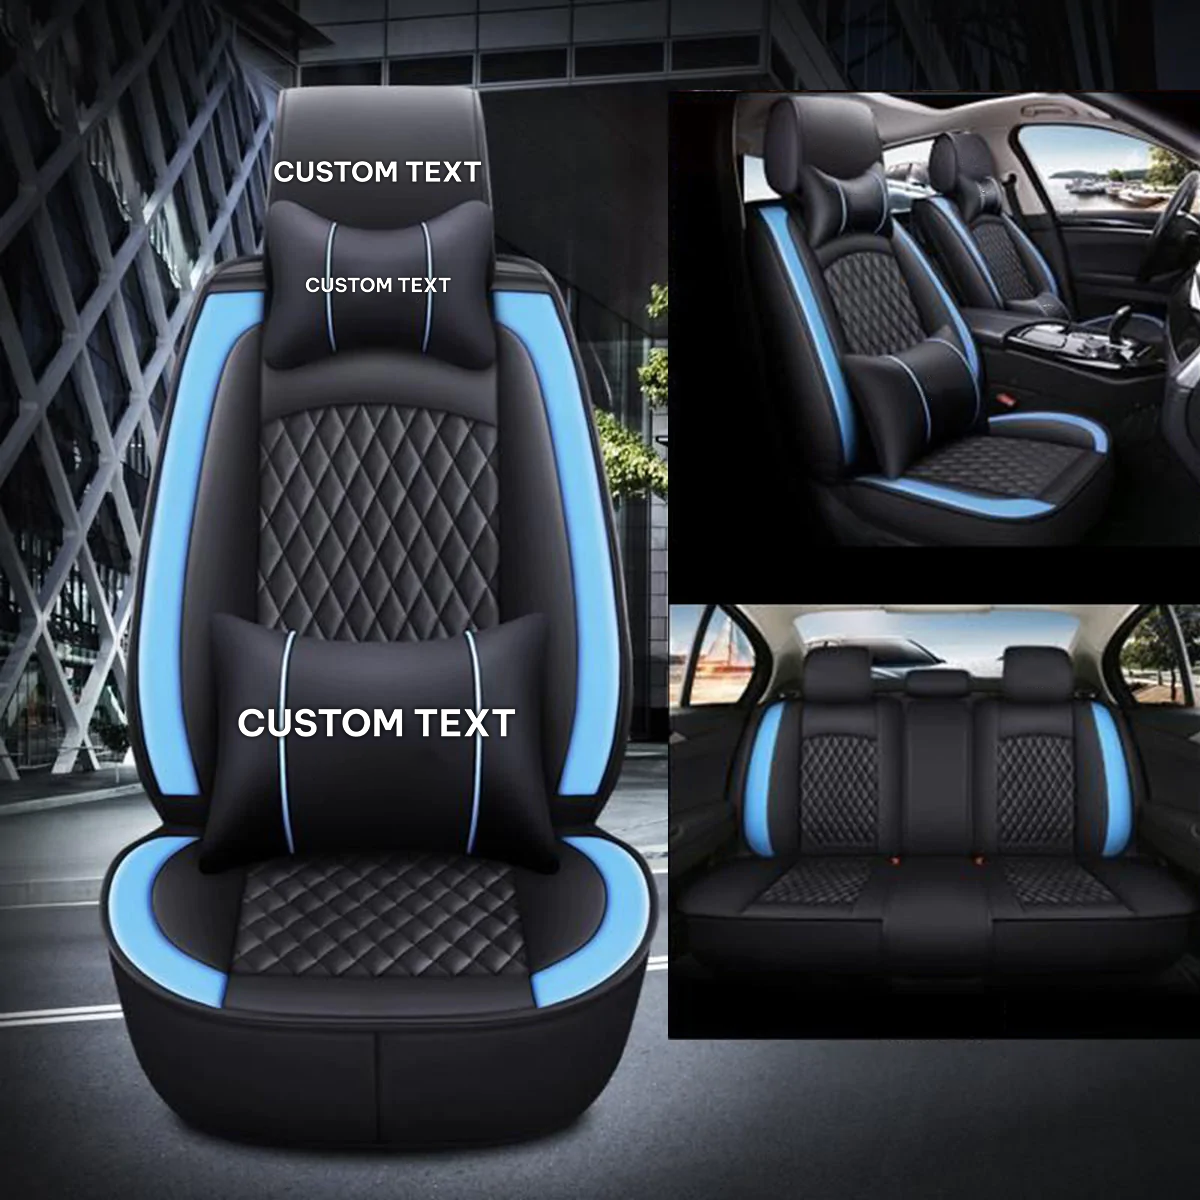 Custom Text For Seat Covers 5 Seats Full Set, Custom Fit For Your Cars, Leatherette Automotive Seat Cushion Protector Universal Fit, Vehicle Auto Interior Decor TY13988